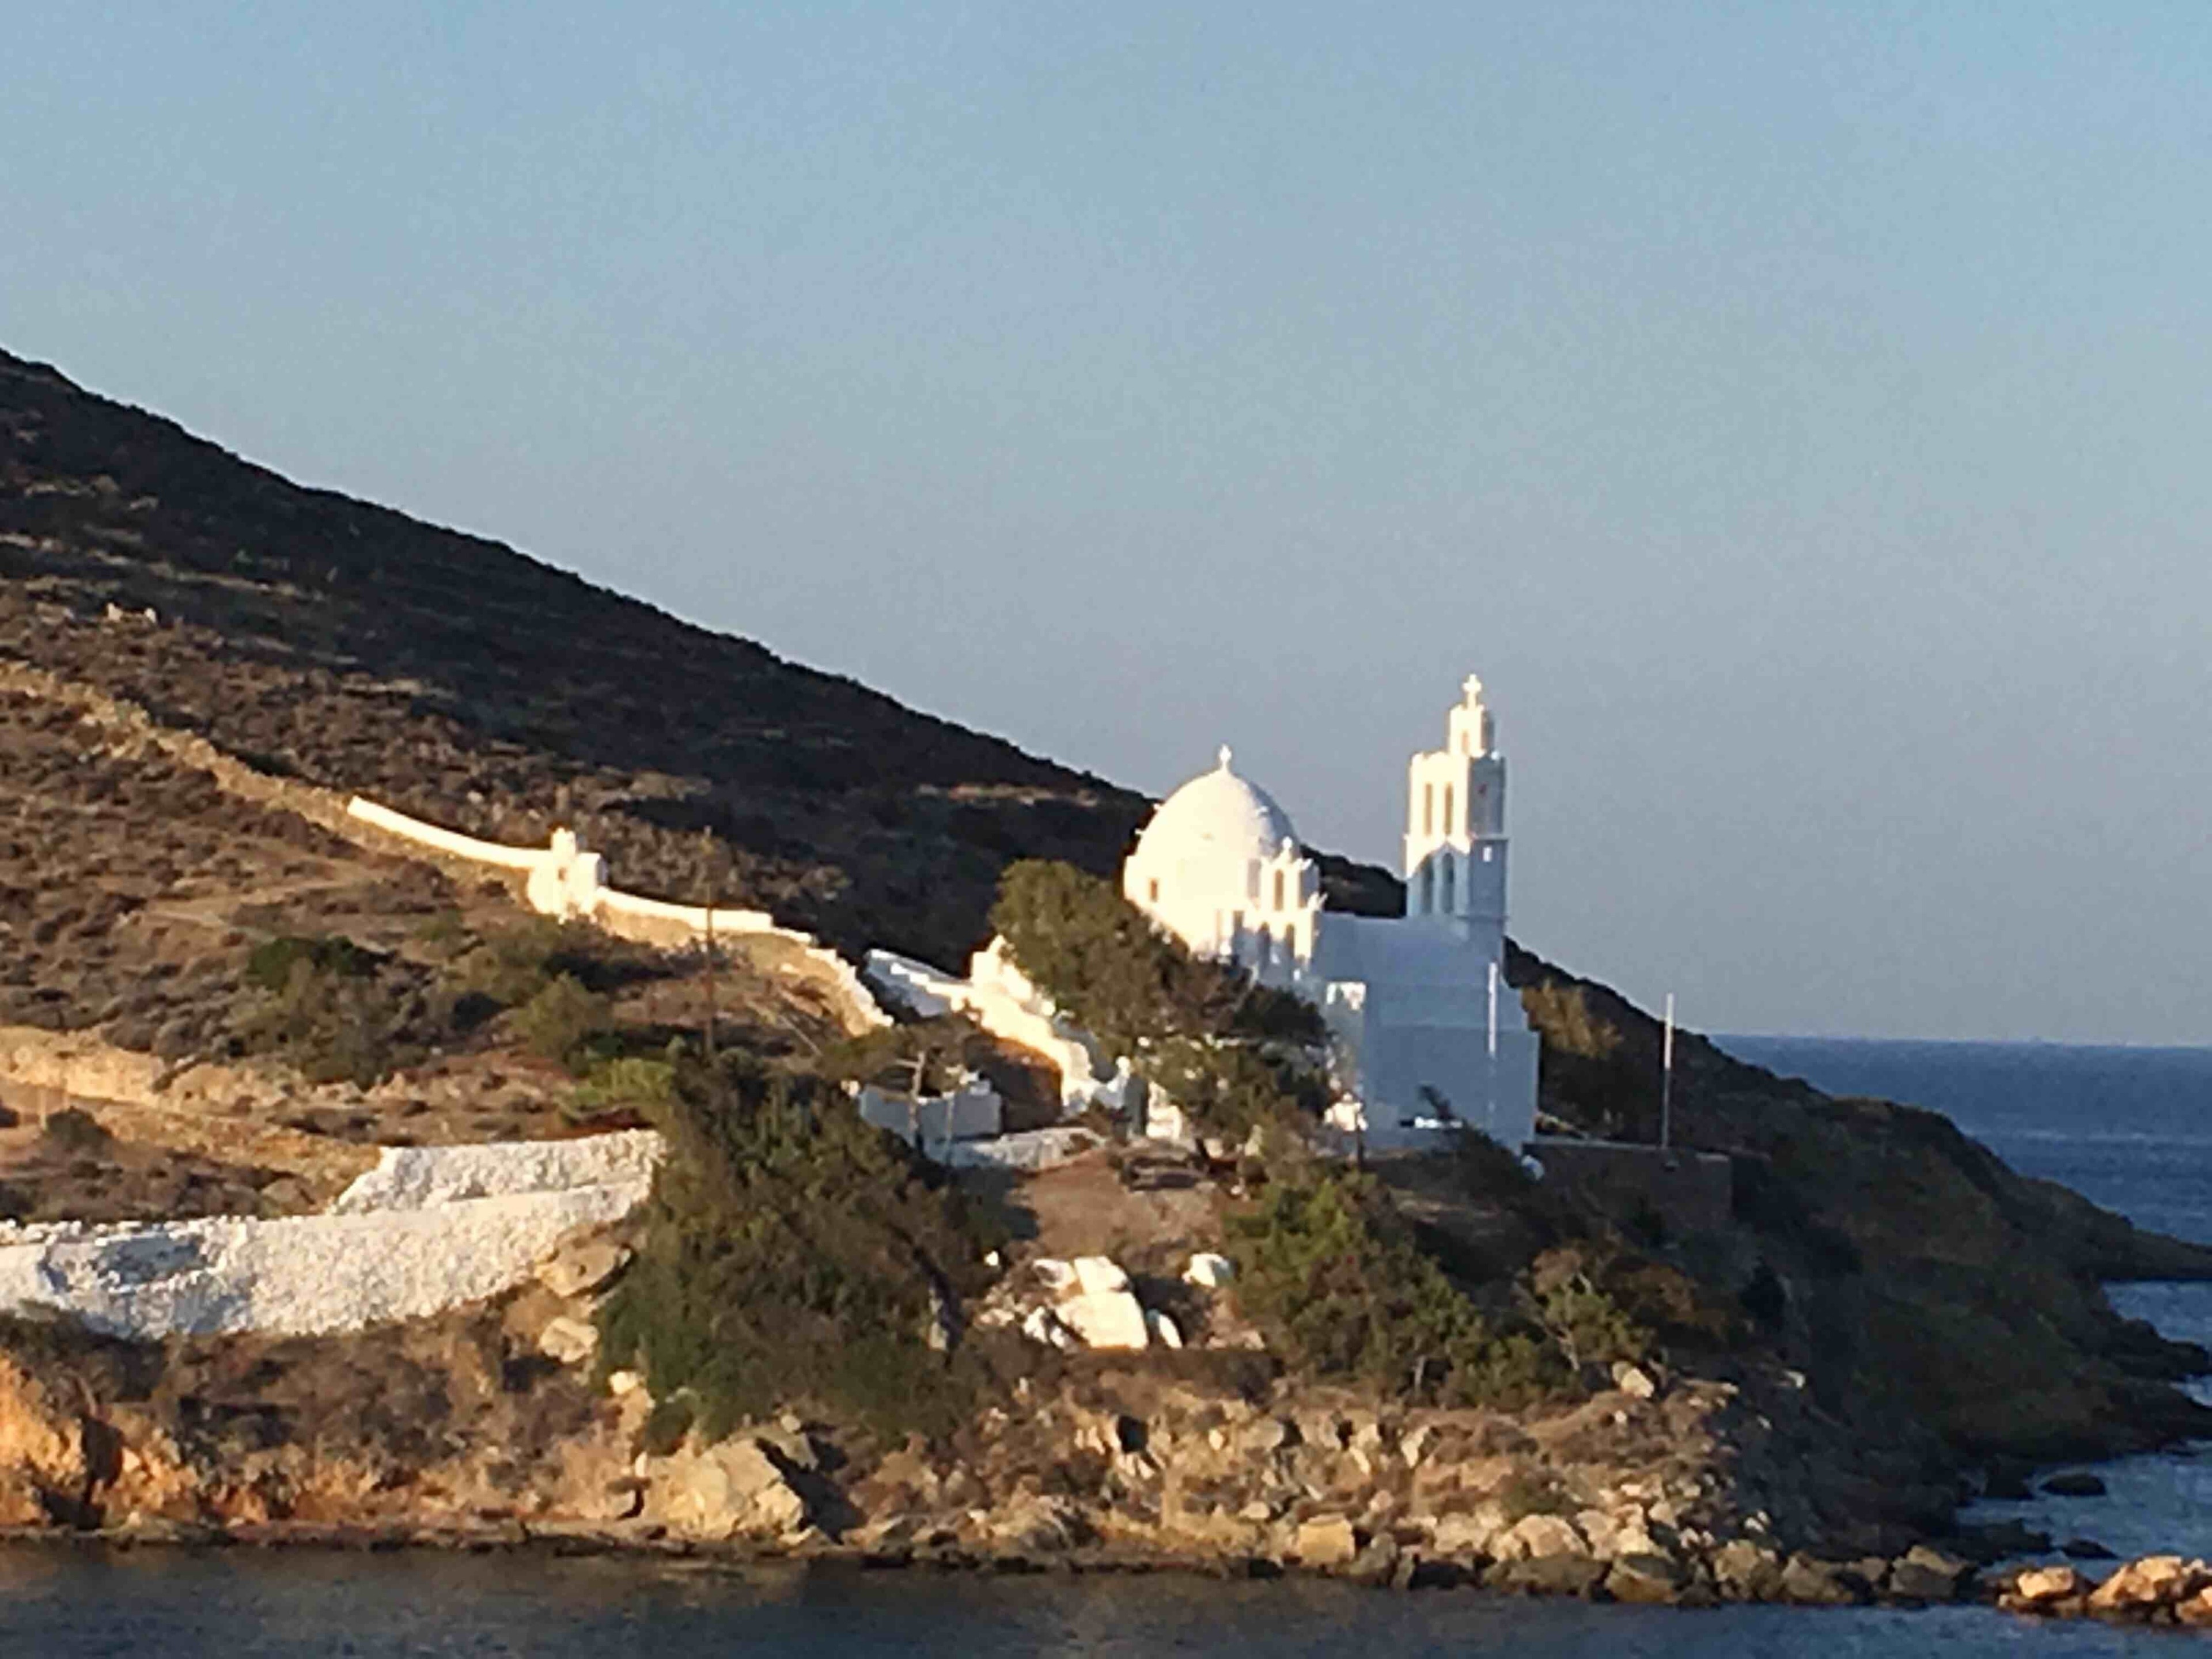 View the church from cruise at port of IOS, Santorini, Greece